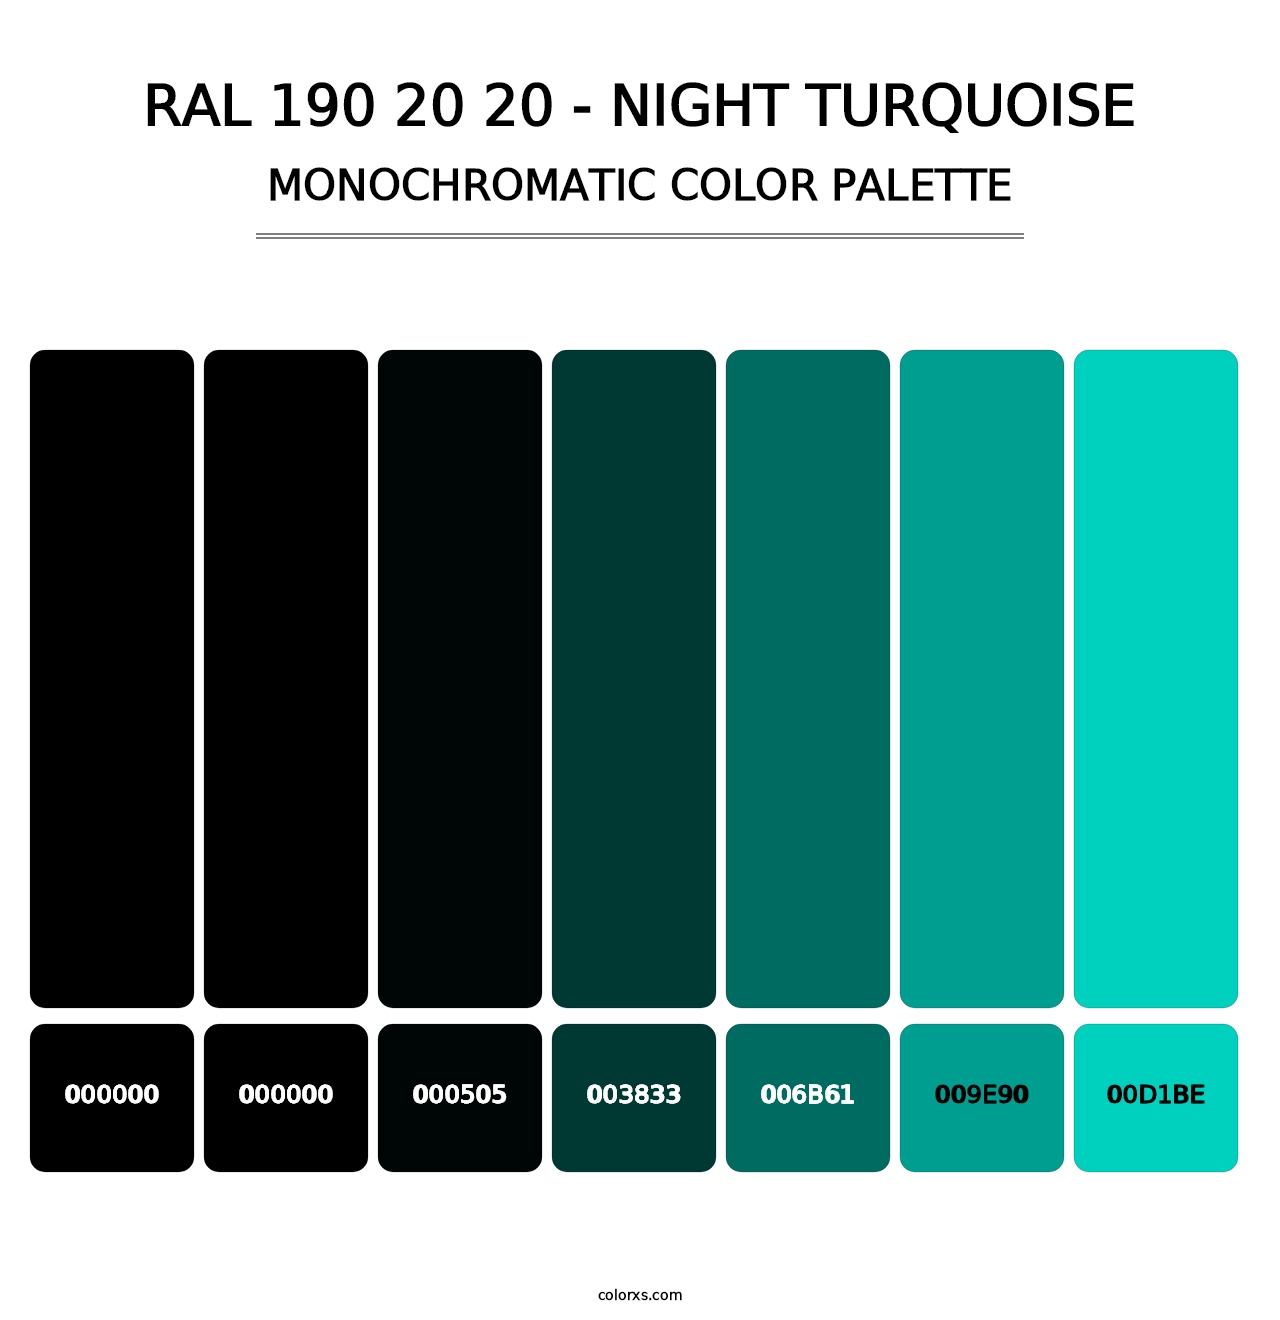 RAL 190 20 20 - Night Turquoise - Monochromatic Color Palette